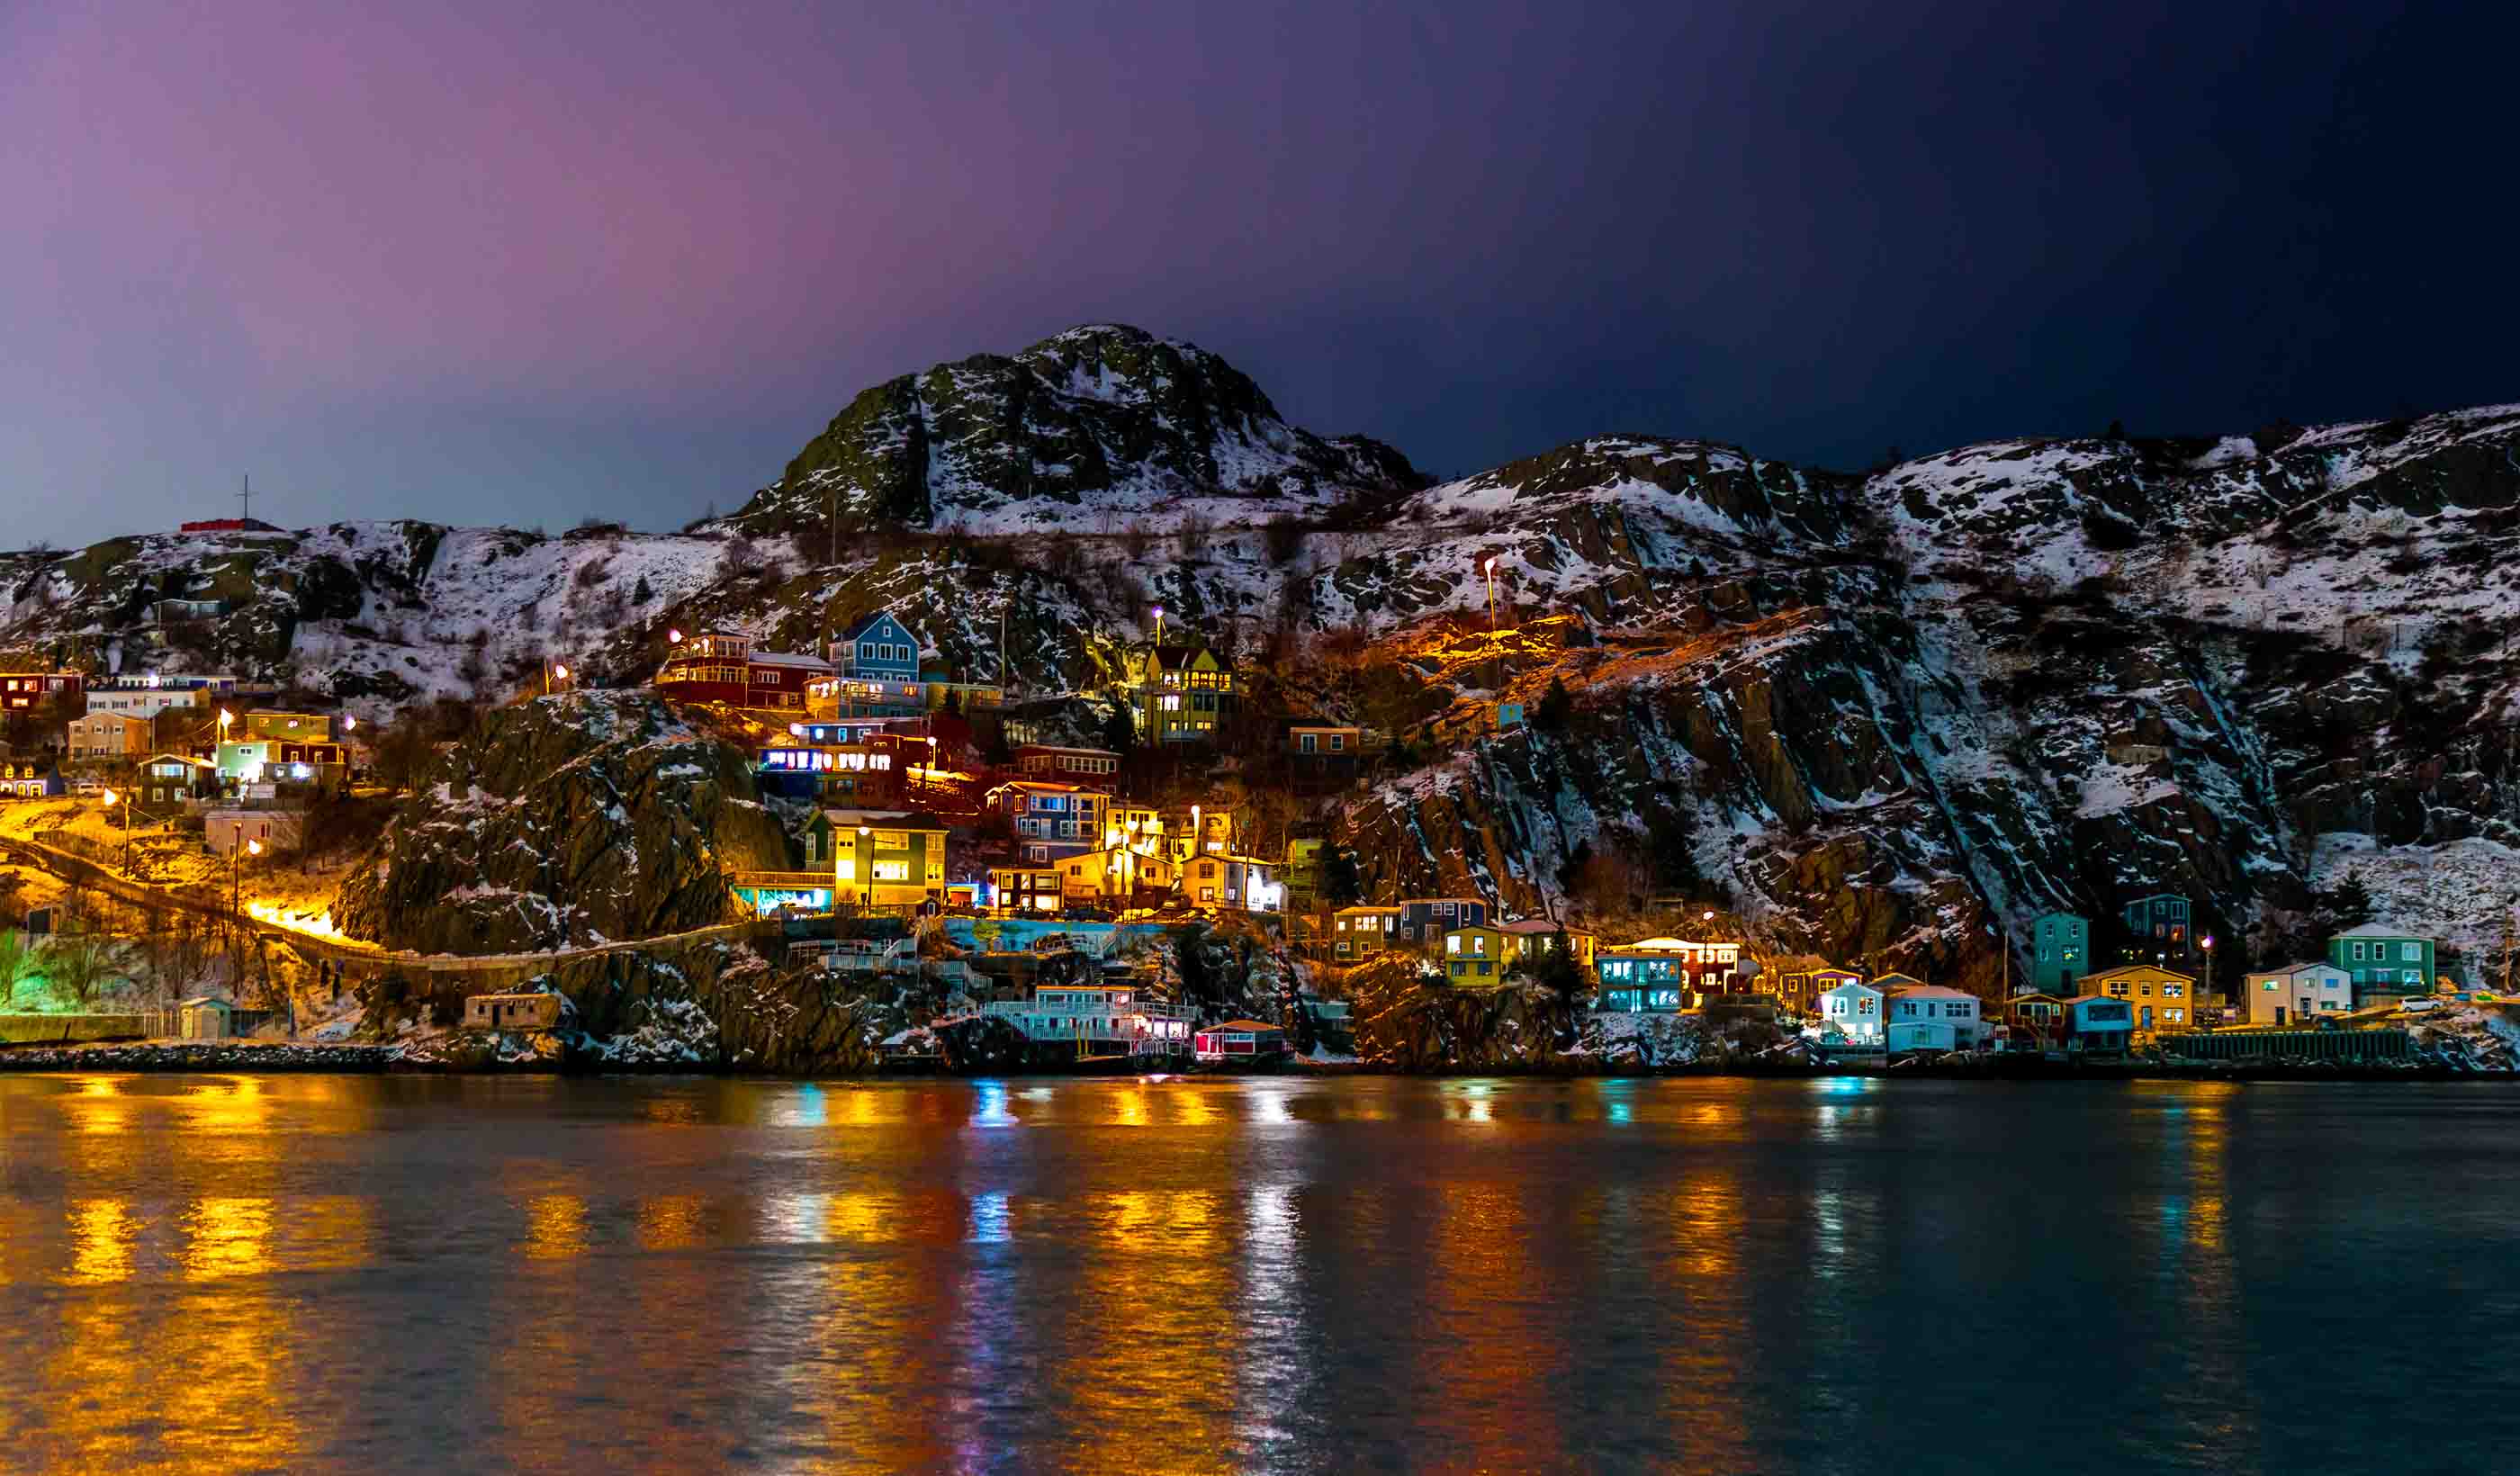 Lights, candles, action: How St. John's can find more bright spots in the dead of winter